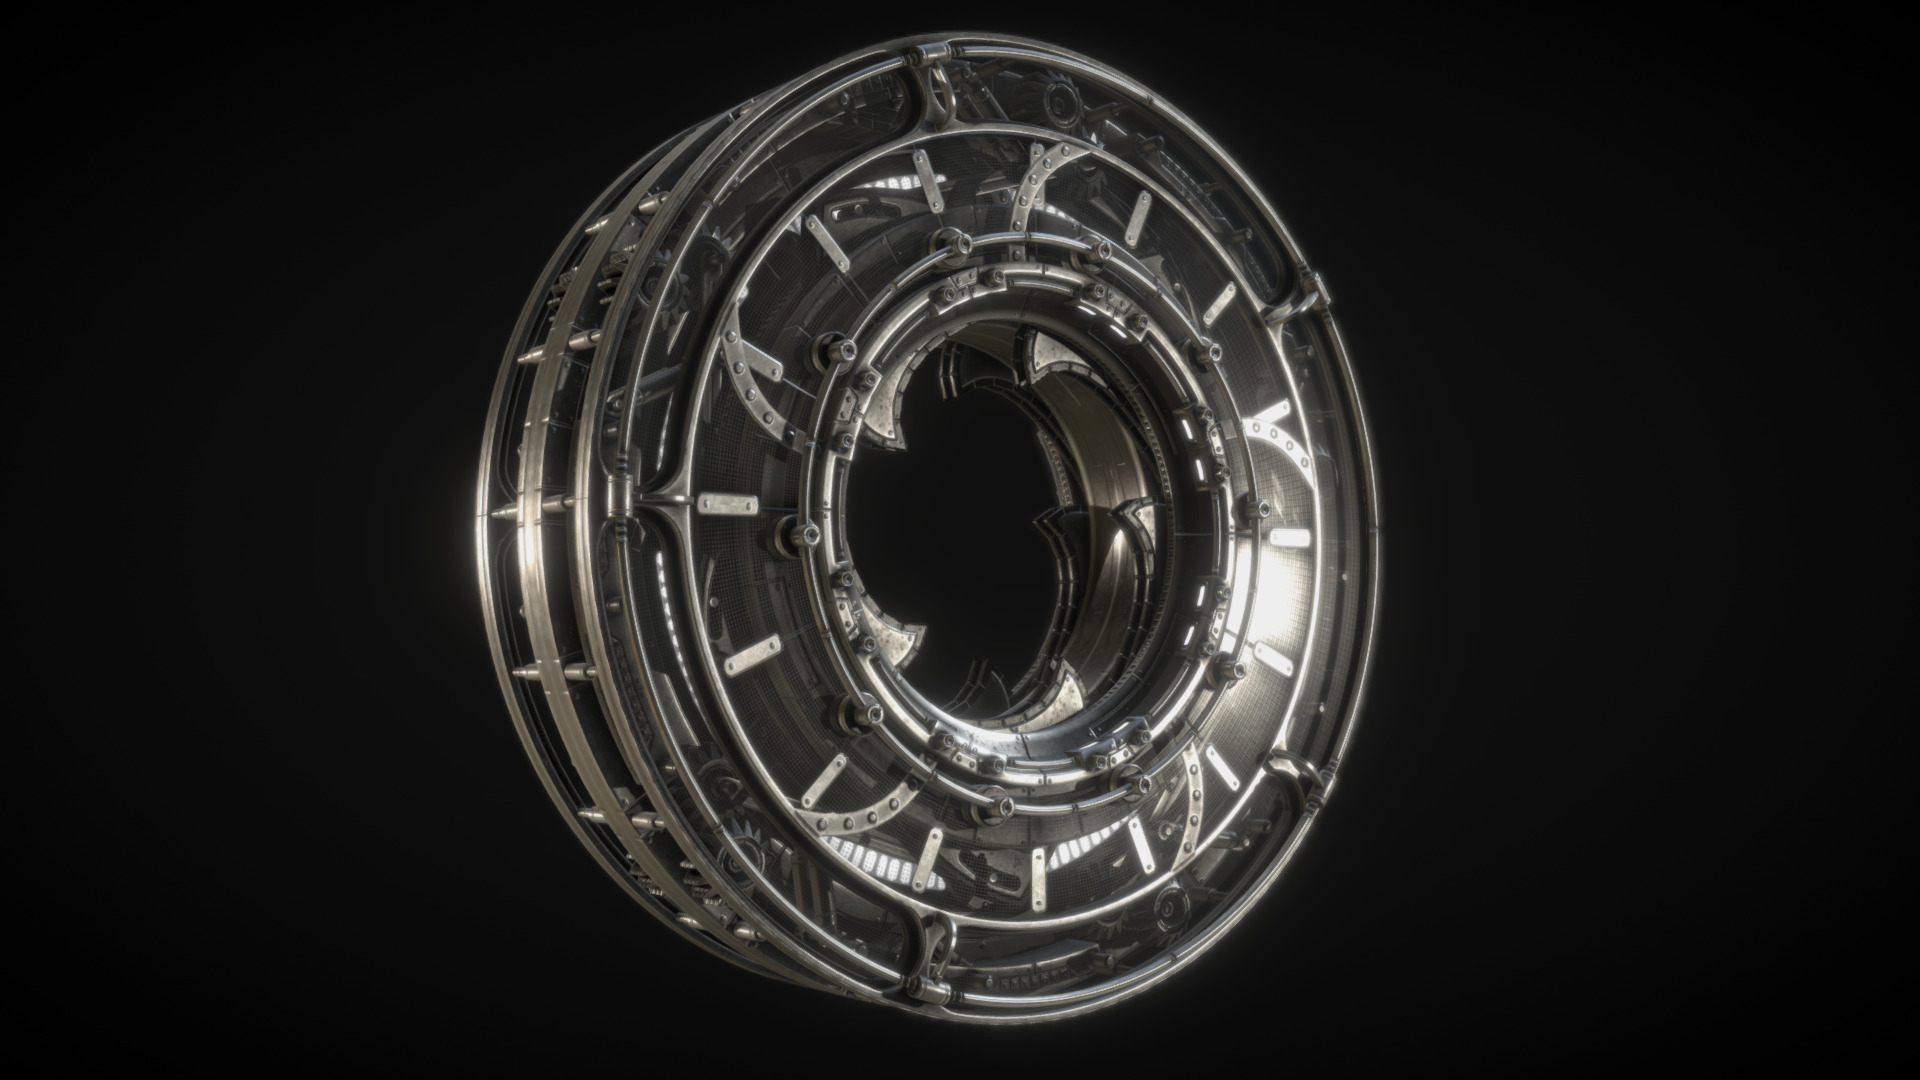 An animated mechanical iris door / hatch.

Modeling and animating was done in Blender, textures in Substance Painter and renders in Marmoset Toolbag. Check out the renders and breakdown here ArtStation link

Textures: 1024x1024 (albedo, roughness, metalness, emission, transparency and AO maps) - Mechanical Iris Door / Hatch - 3D model by Sami Tarvainen (@samitarvainen) 3d model